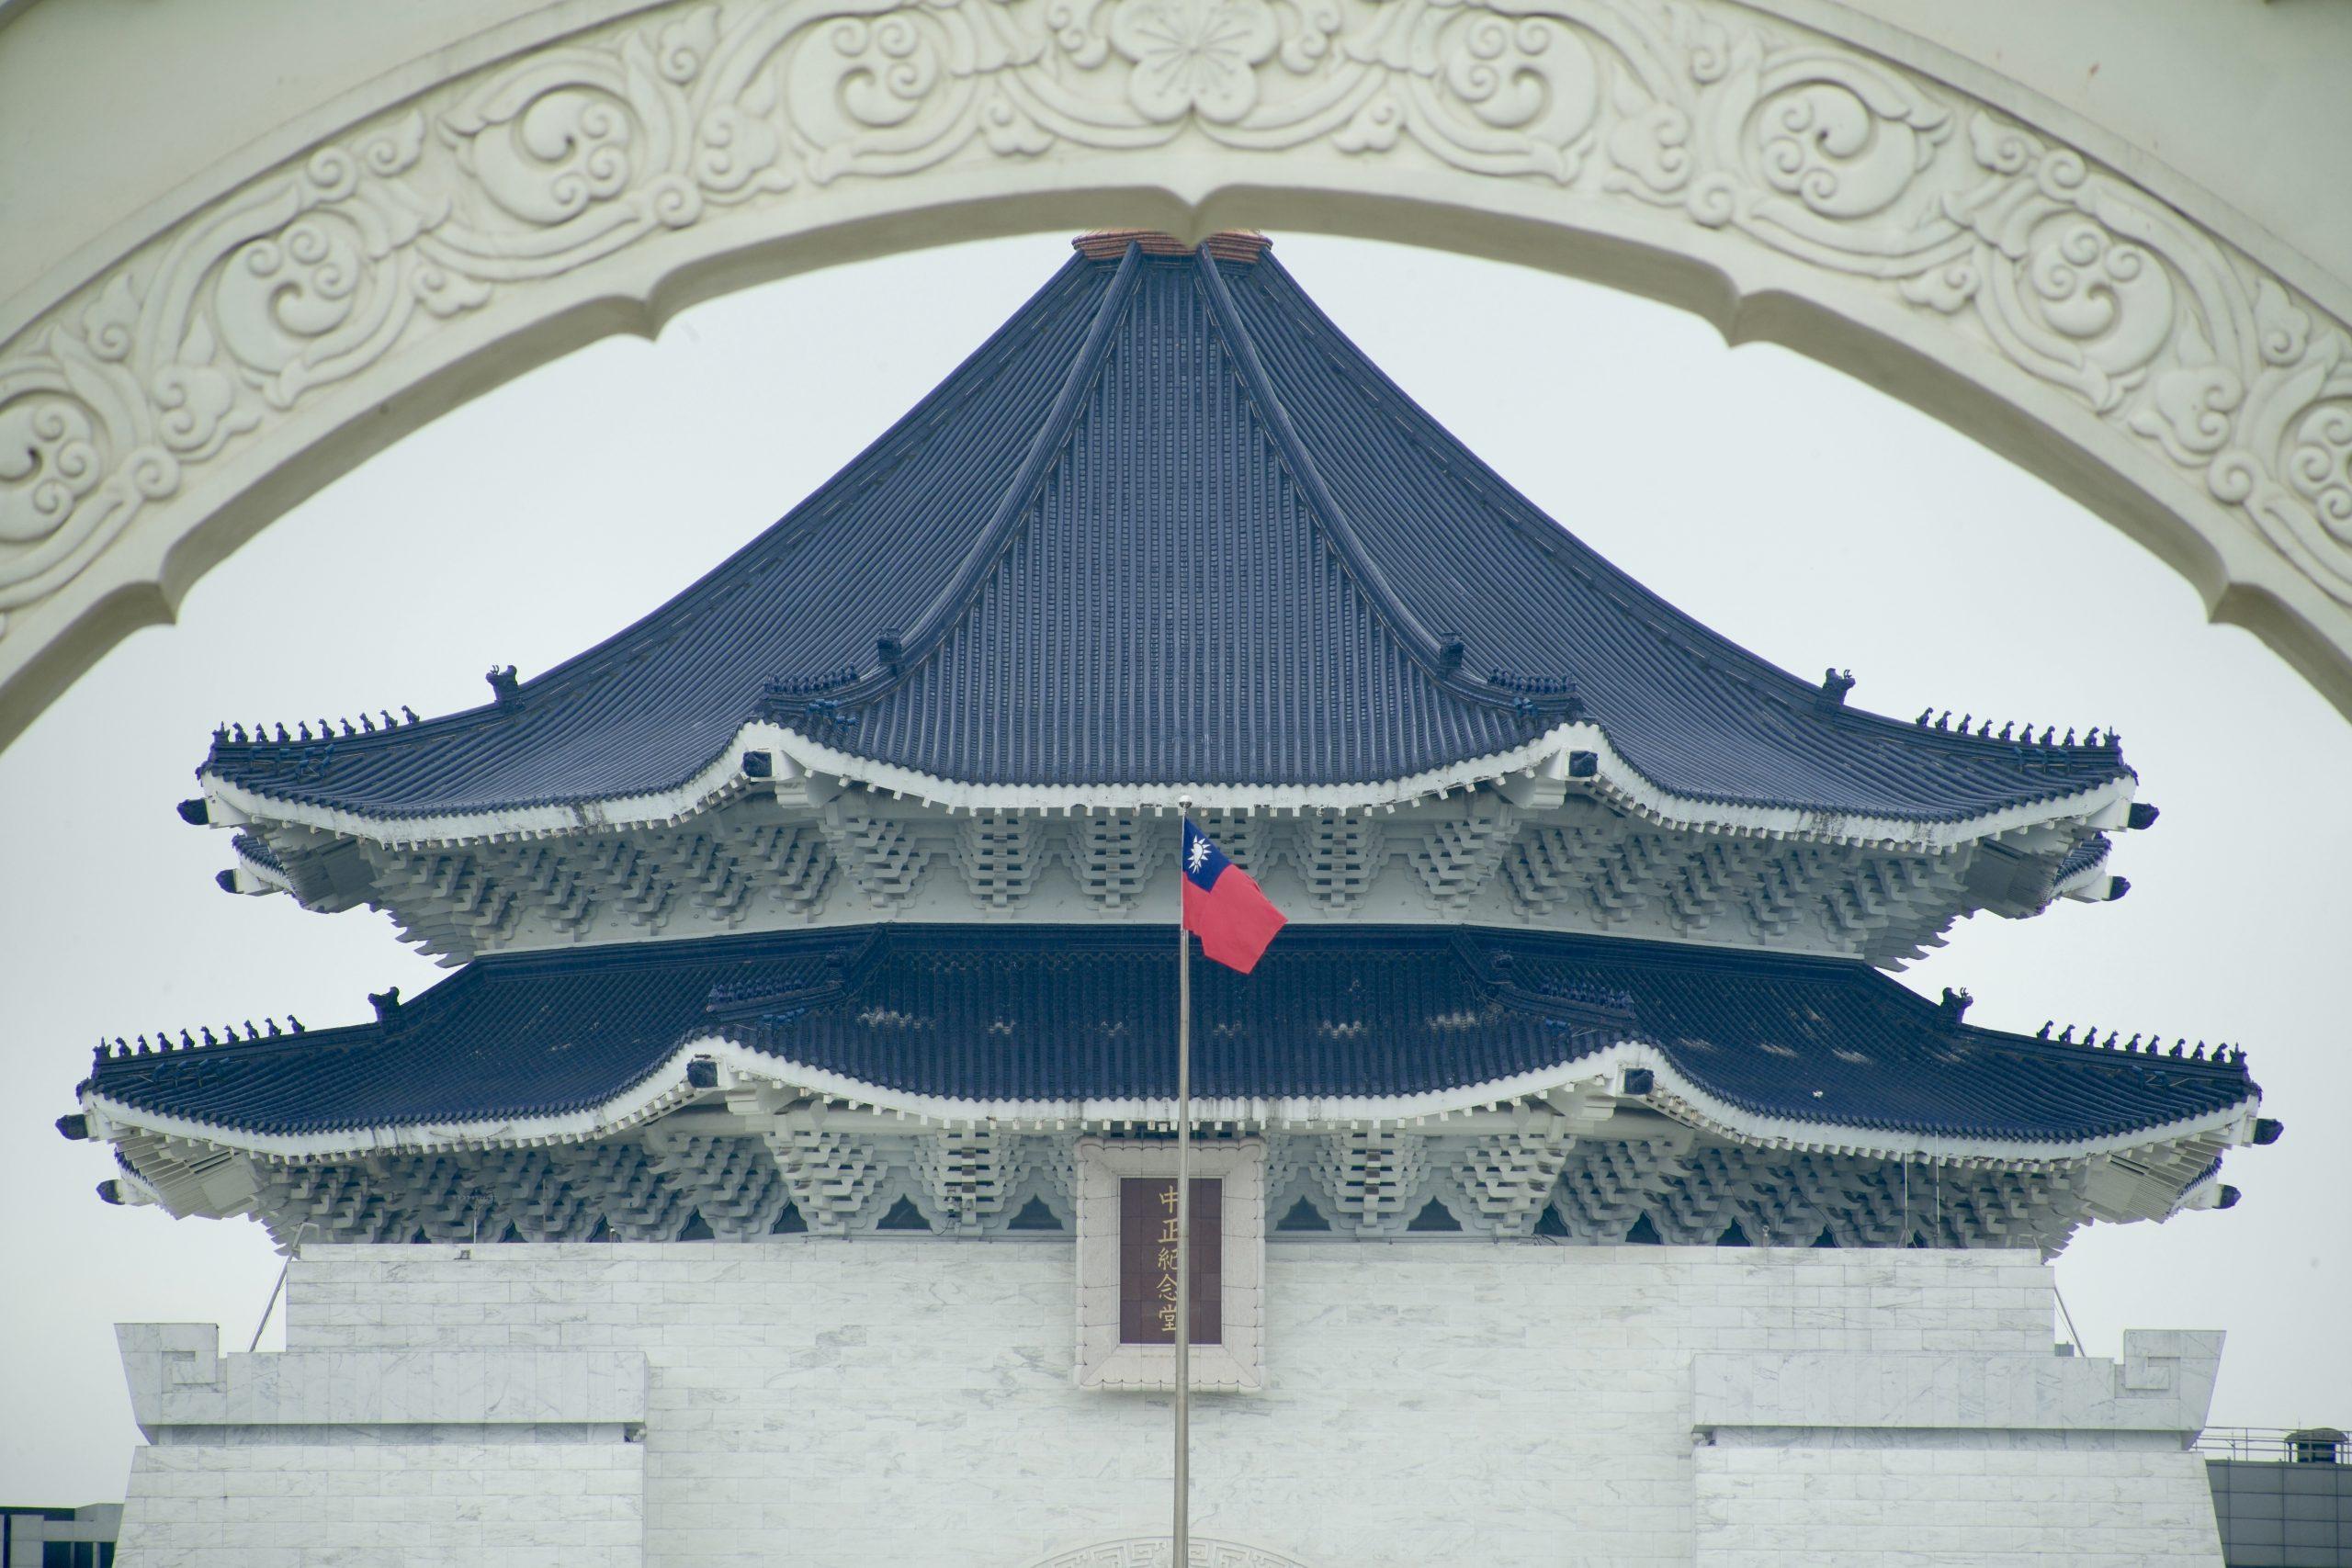 A Taiwan national flag flutters in front of the Chiang Kai-shek Memorial Hall in Taipei on May 24. China's defence minister has vowed China will 'fight to the very end' to stop any independence bid by Taiwan. Photo: AFP